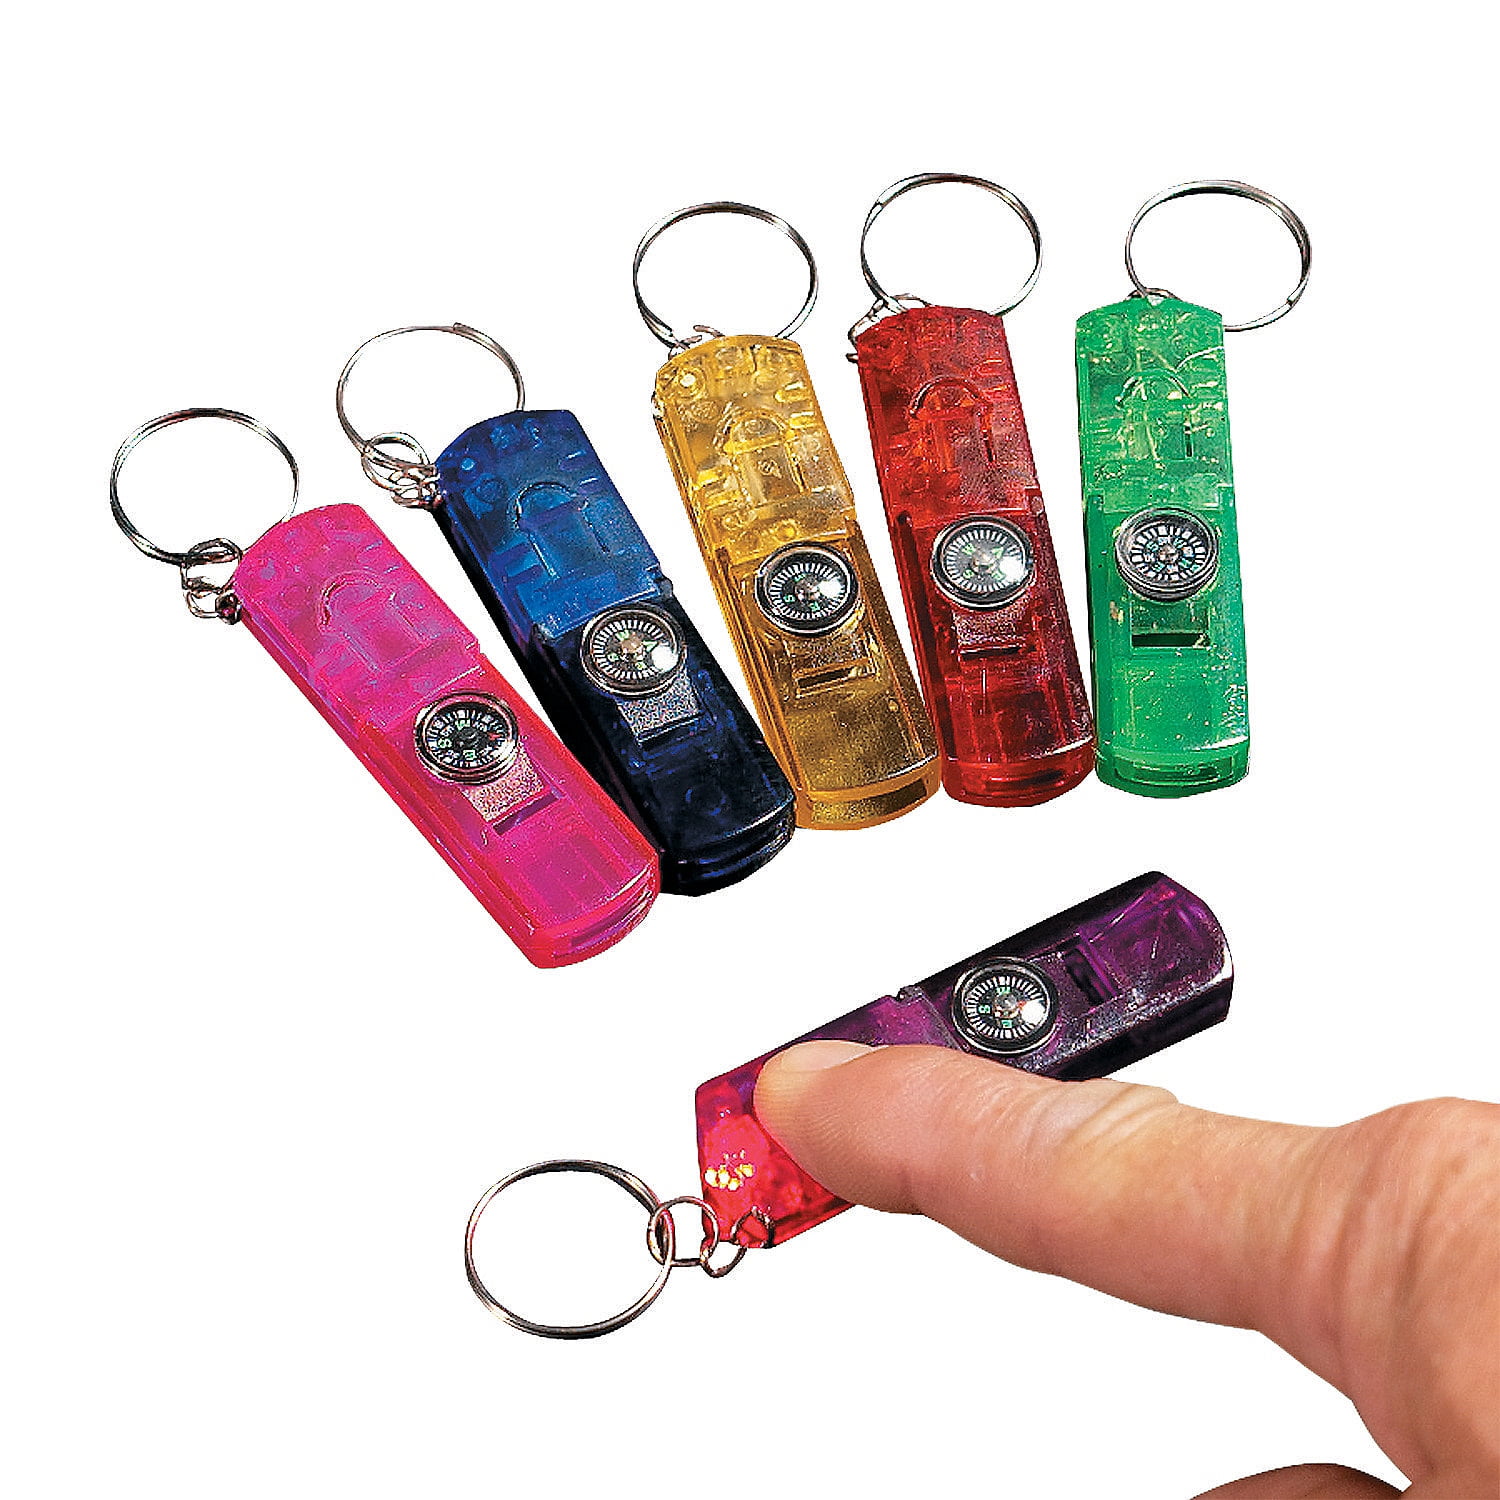 3 in 1 Whistle & Compass Light Key Chain - Party Wear - 12 Pieces